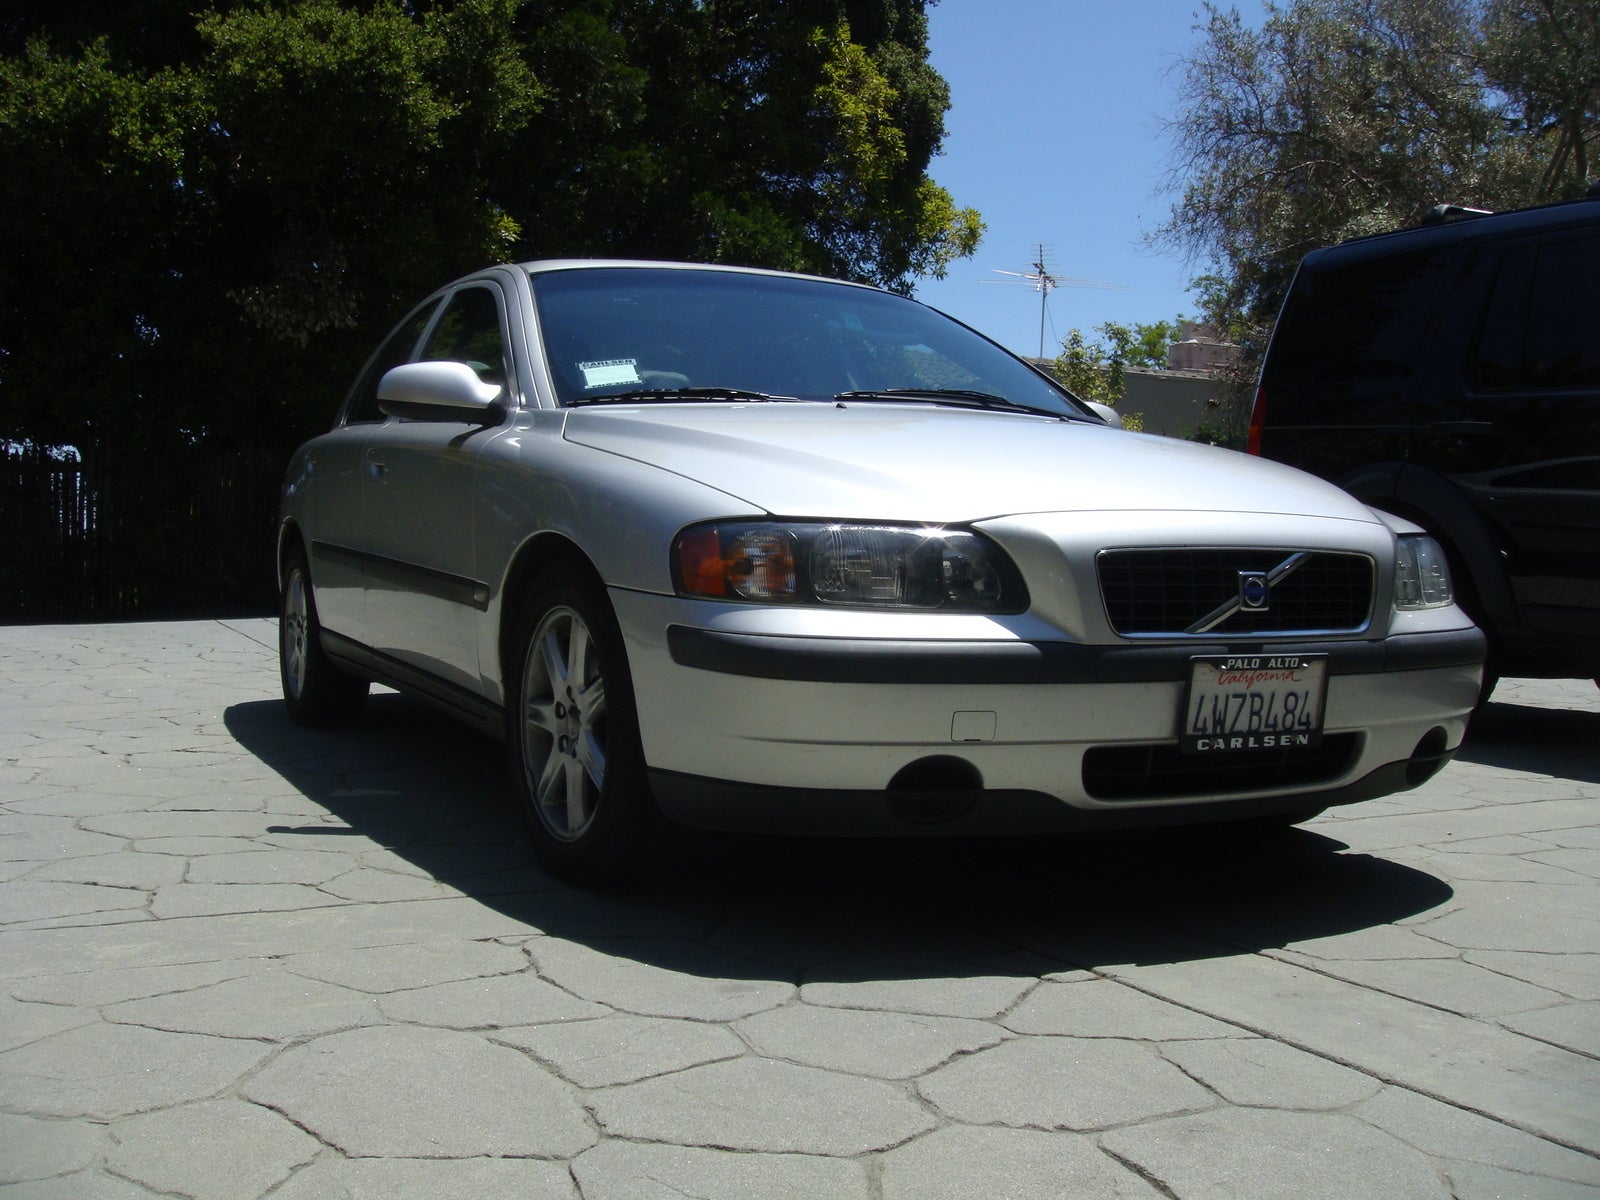 2002 Volvo  on 2002 Volvo S60 2 4t Picture View Garage Sbacara Owns This Volvo S60